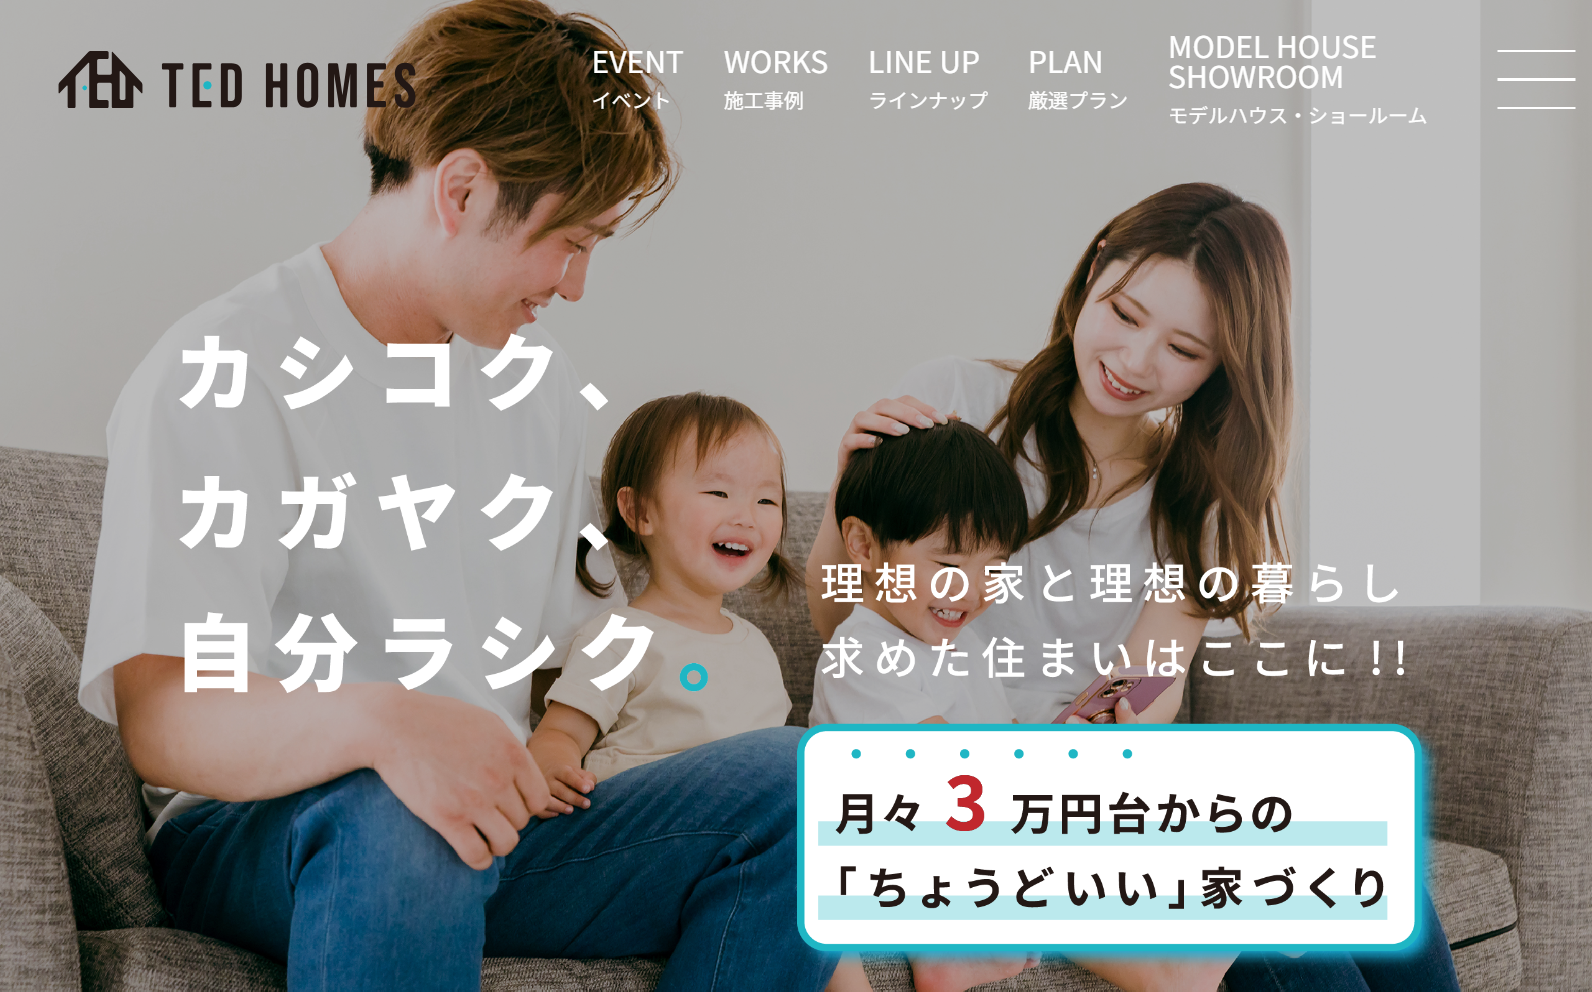 <ruby>TED<rt>テッド</rt></ruby> <ruby>HOMES<rt>ホームズ</rt></ruby>